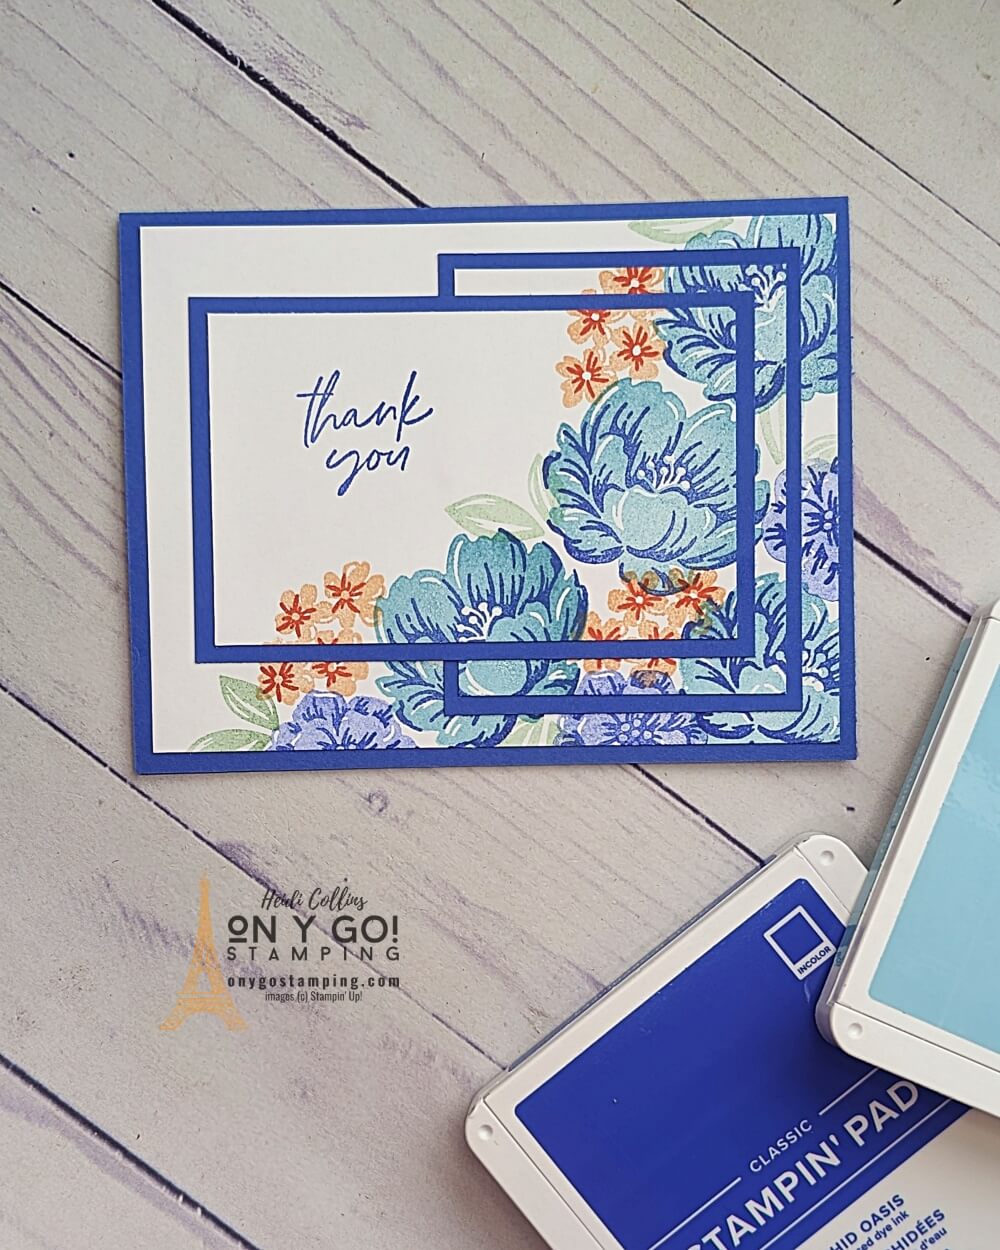 Are you looking for the perfect way to say thanks and show your appreciation? Look no further than the beautiful Two-Tone Flora stamp set by Stampin' Up!, and the easy rubber-stamping technique of Triple Stamping. This technique will bring color and texture to your handmade thank you cards in an effortless way.